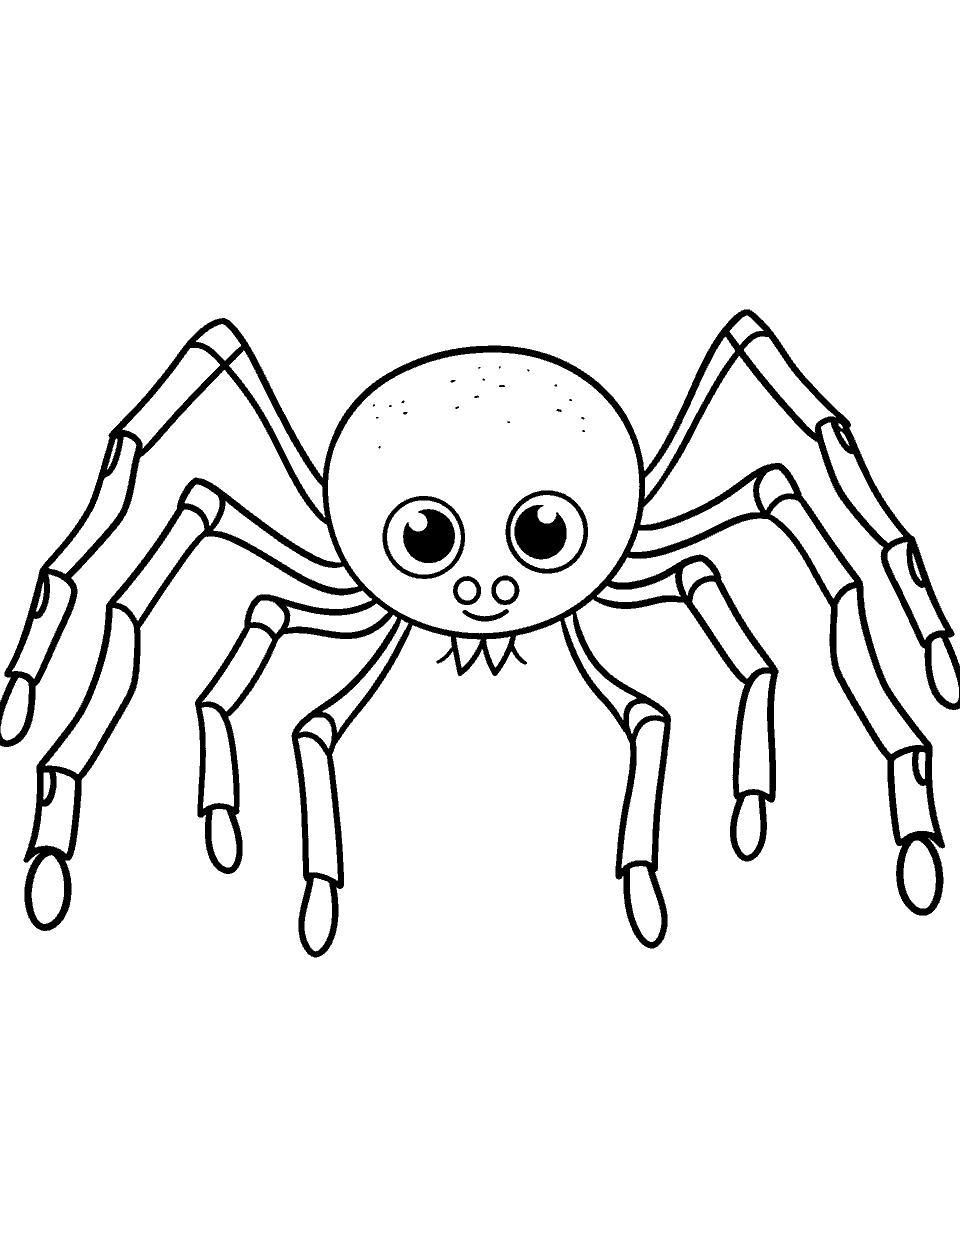 Simple Spider Drawing Coloring Page - A basic, easy-to-color spider with a round body and eight simple legs.